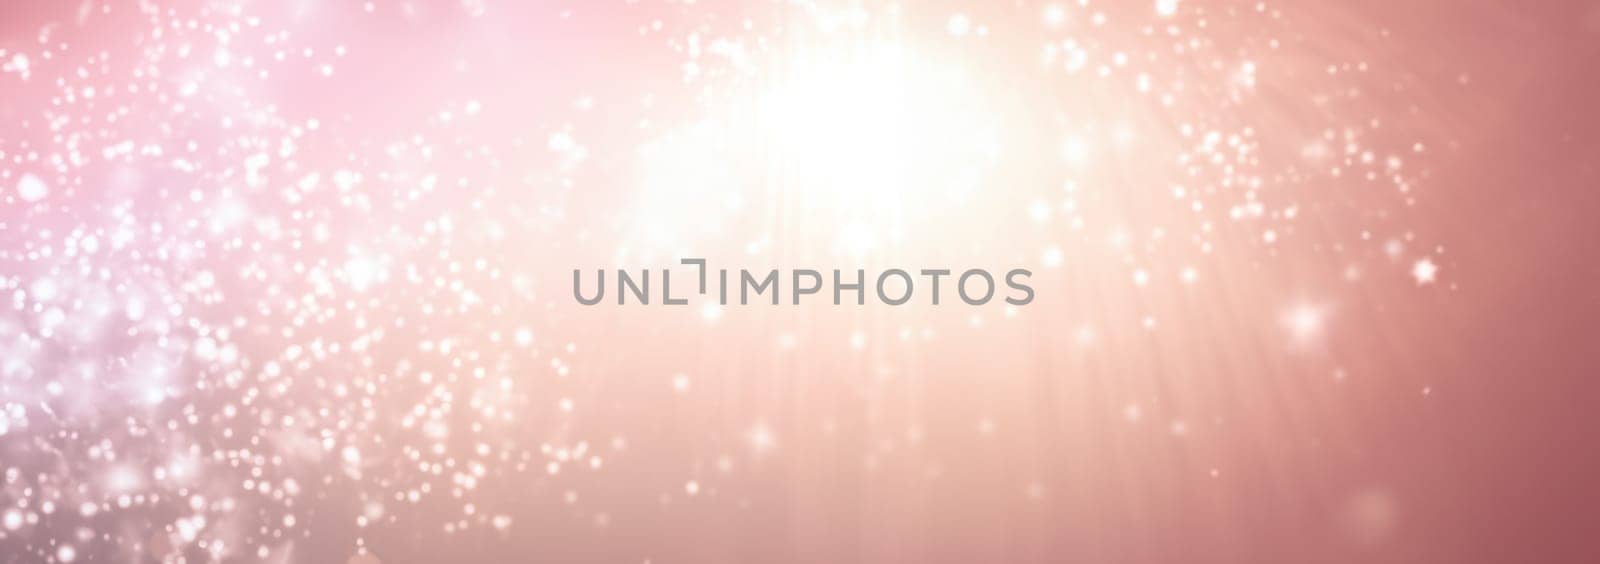 Soft pink background banner. Abstract light, pink background with lines and layers. Profile header, site header. design, illustration by Annebel146